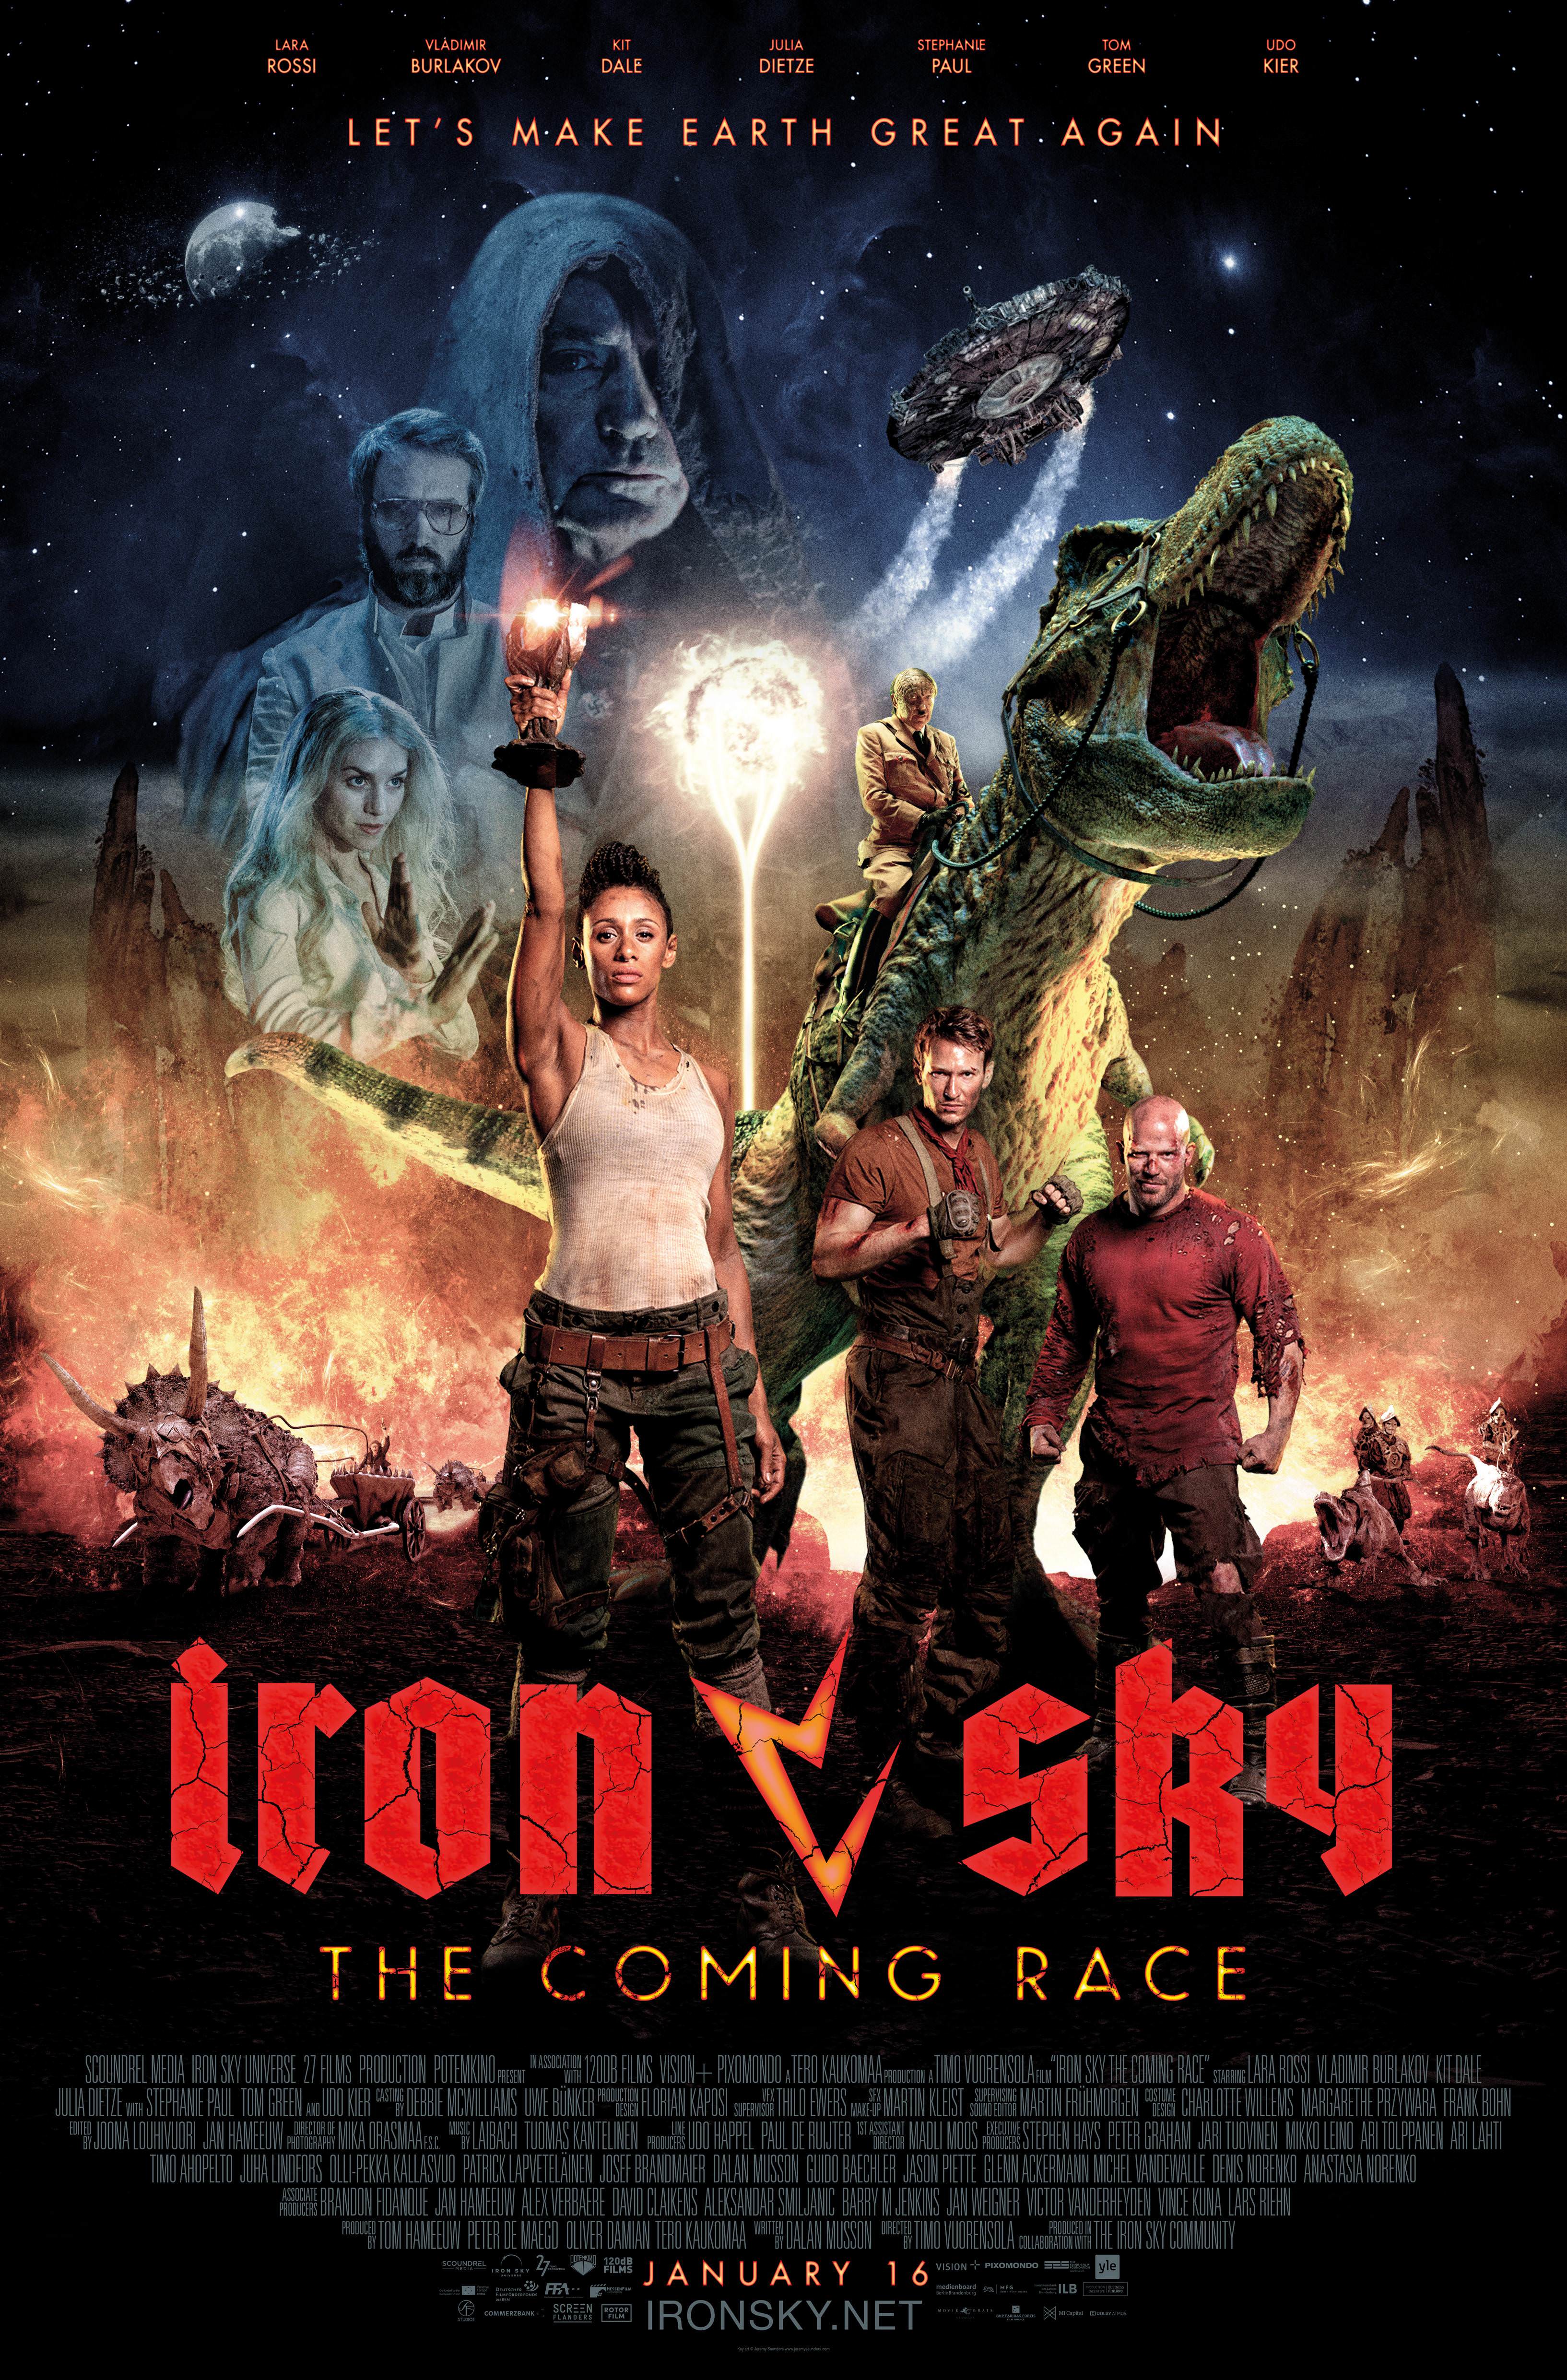 meme iron sky the coming race poster - Let'S Make Earth Great Again tron V sky The Coming Race January 16 Ironskynet